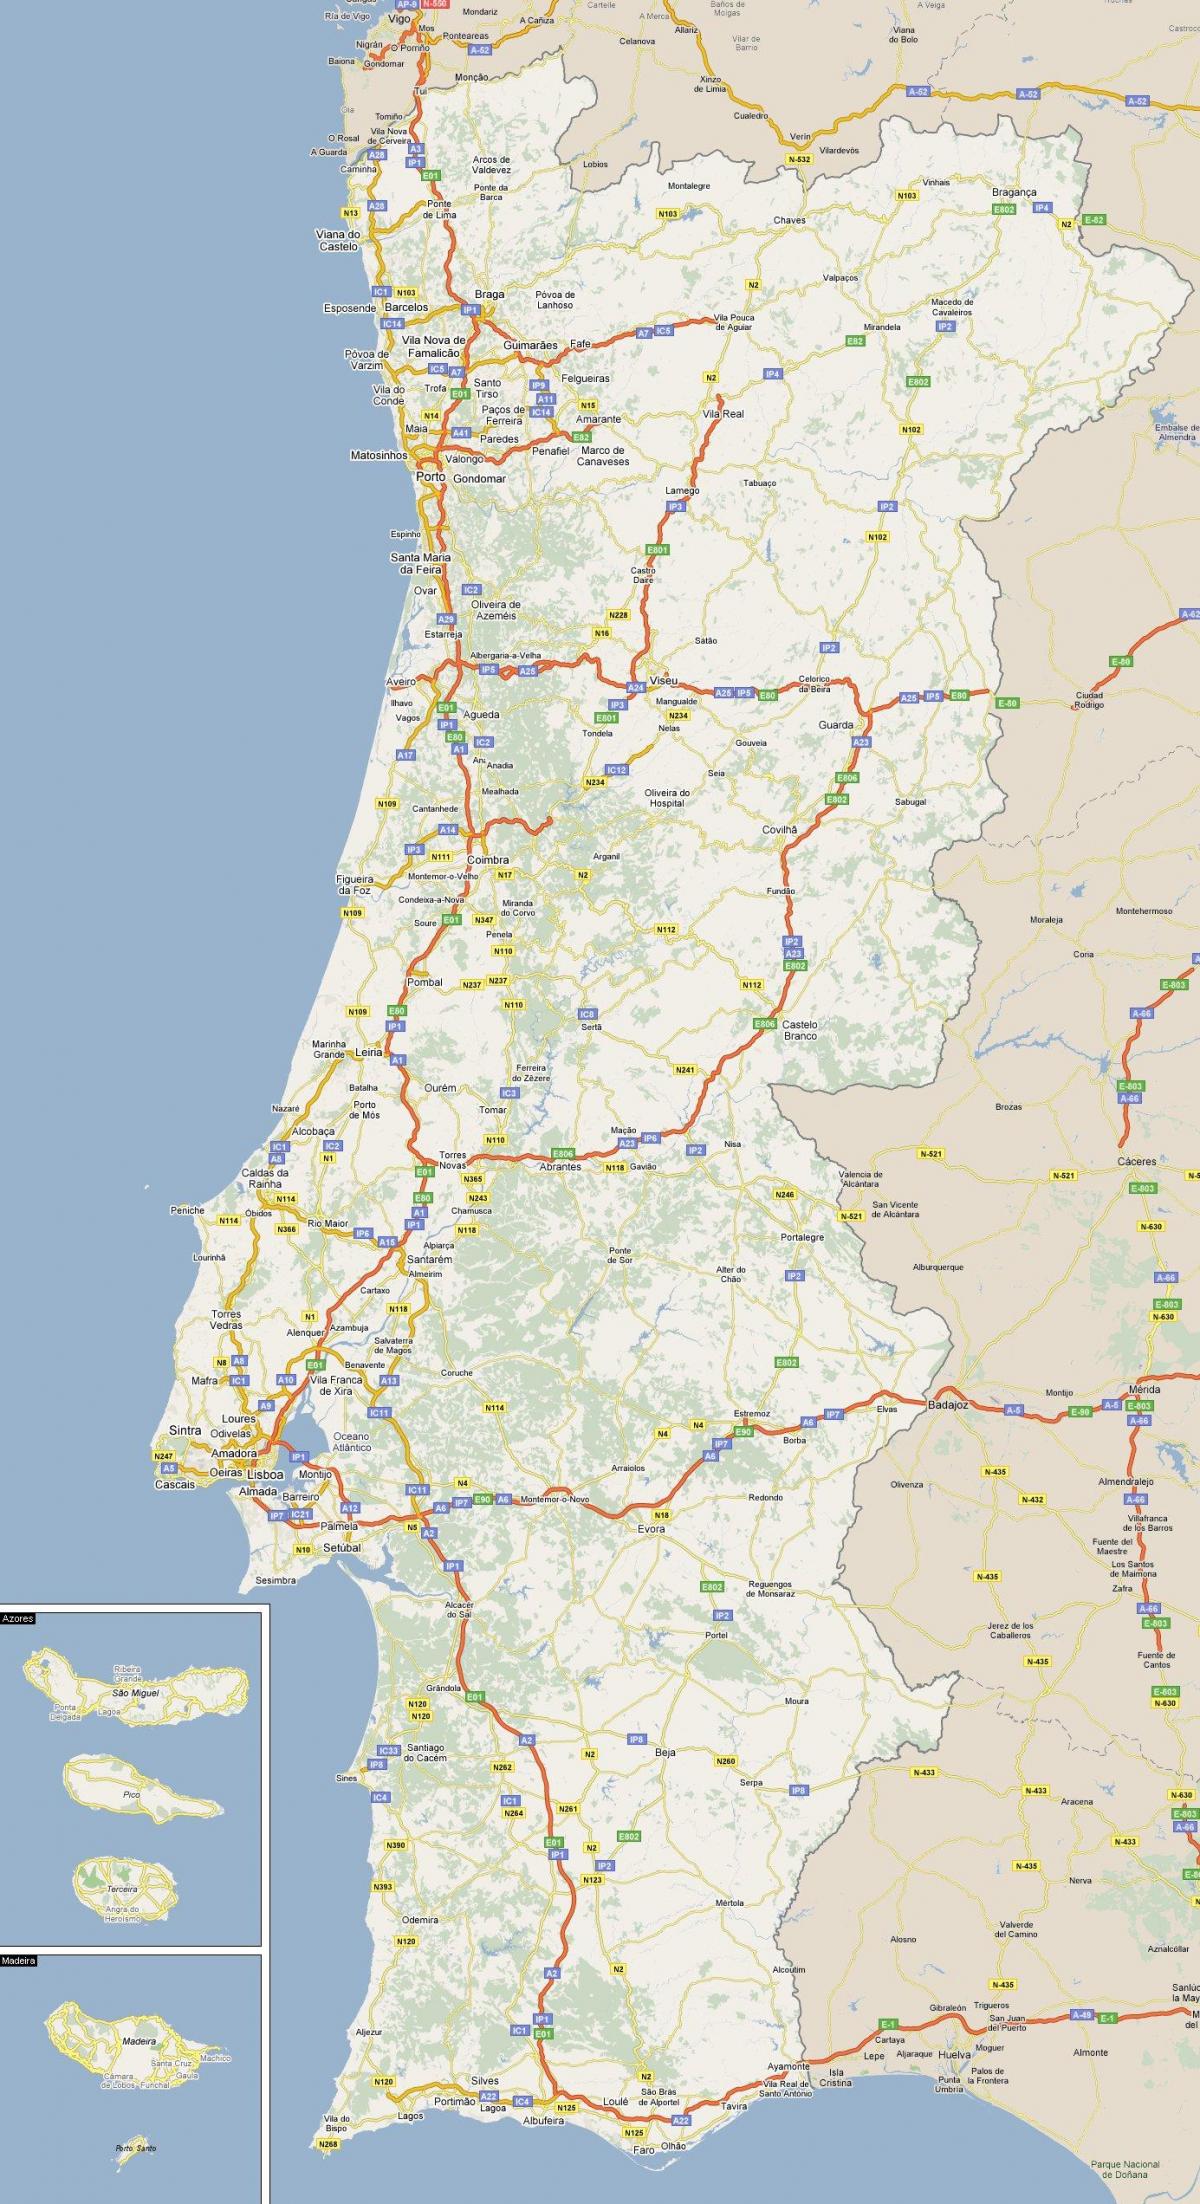 Driving map of Portugal